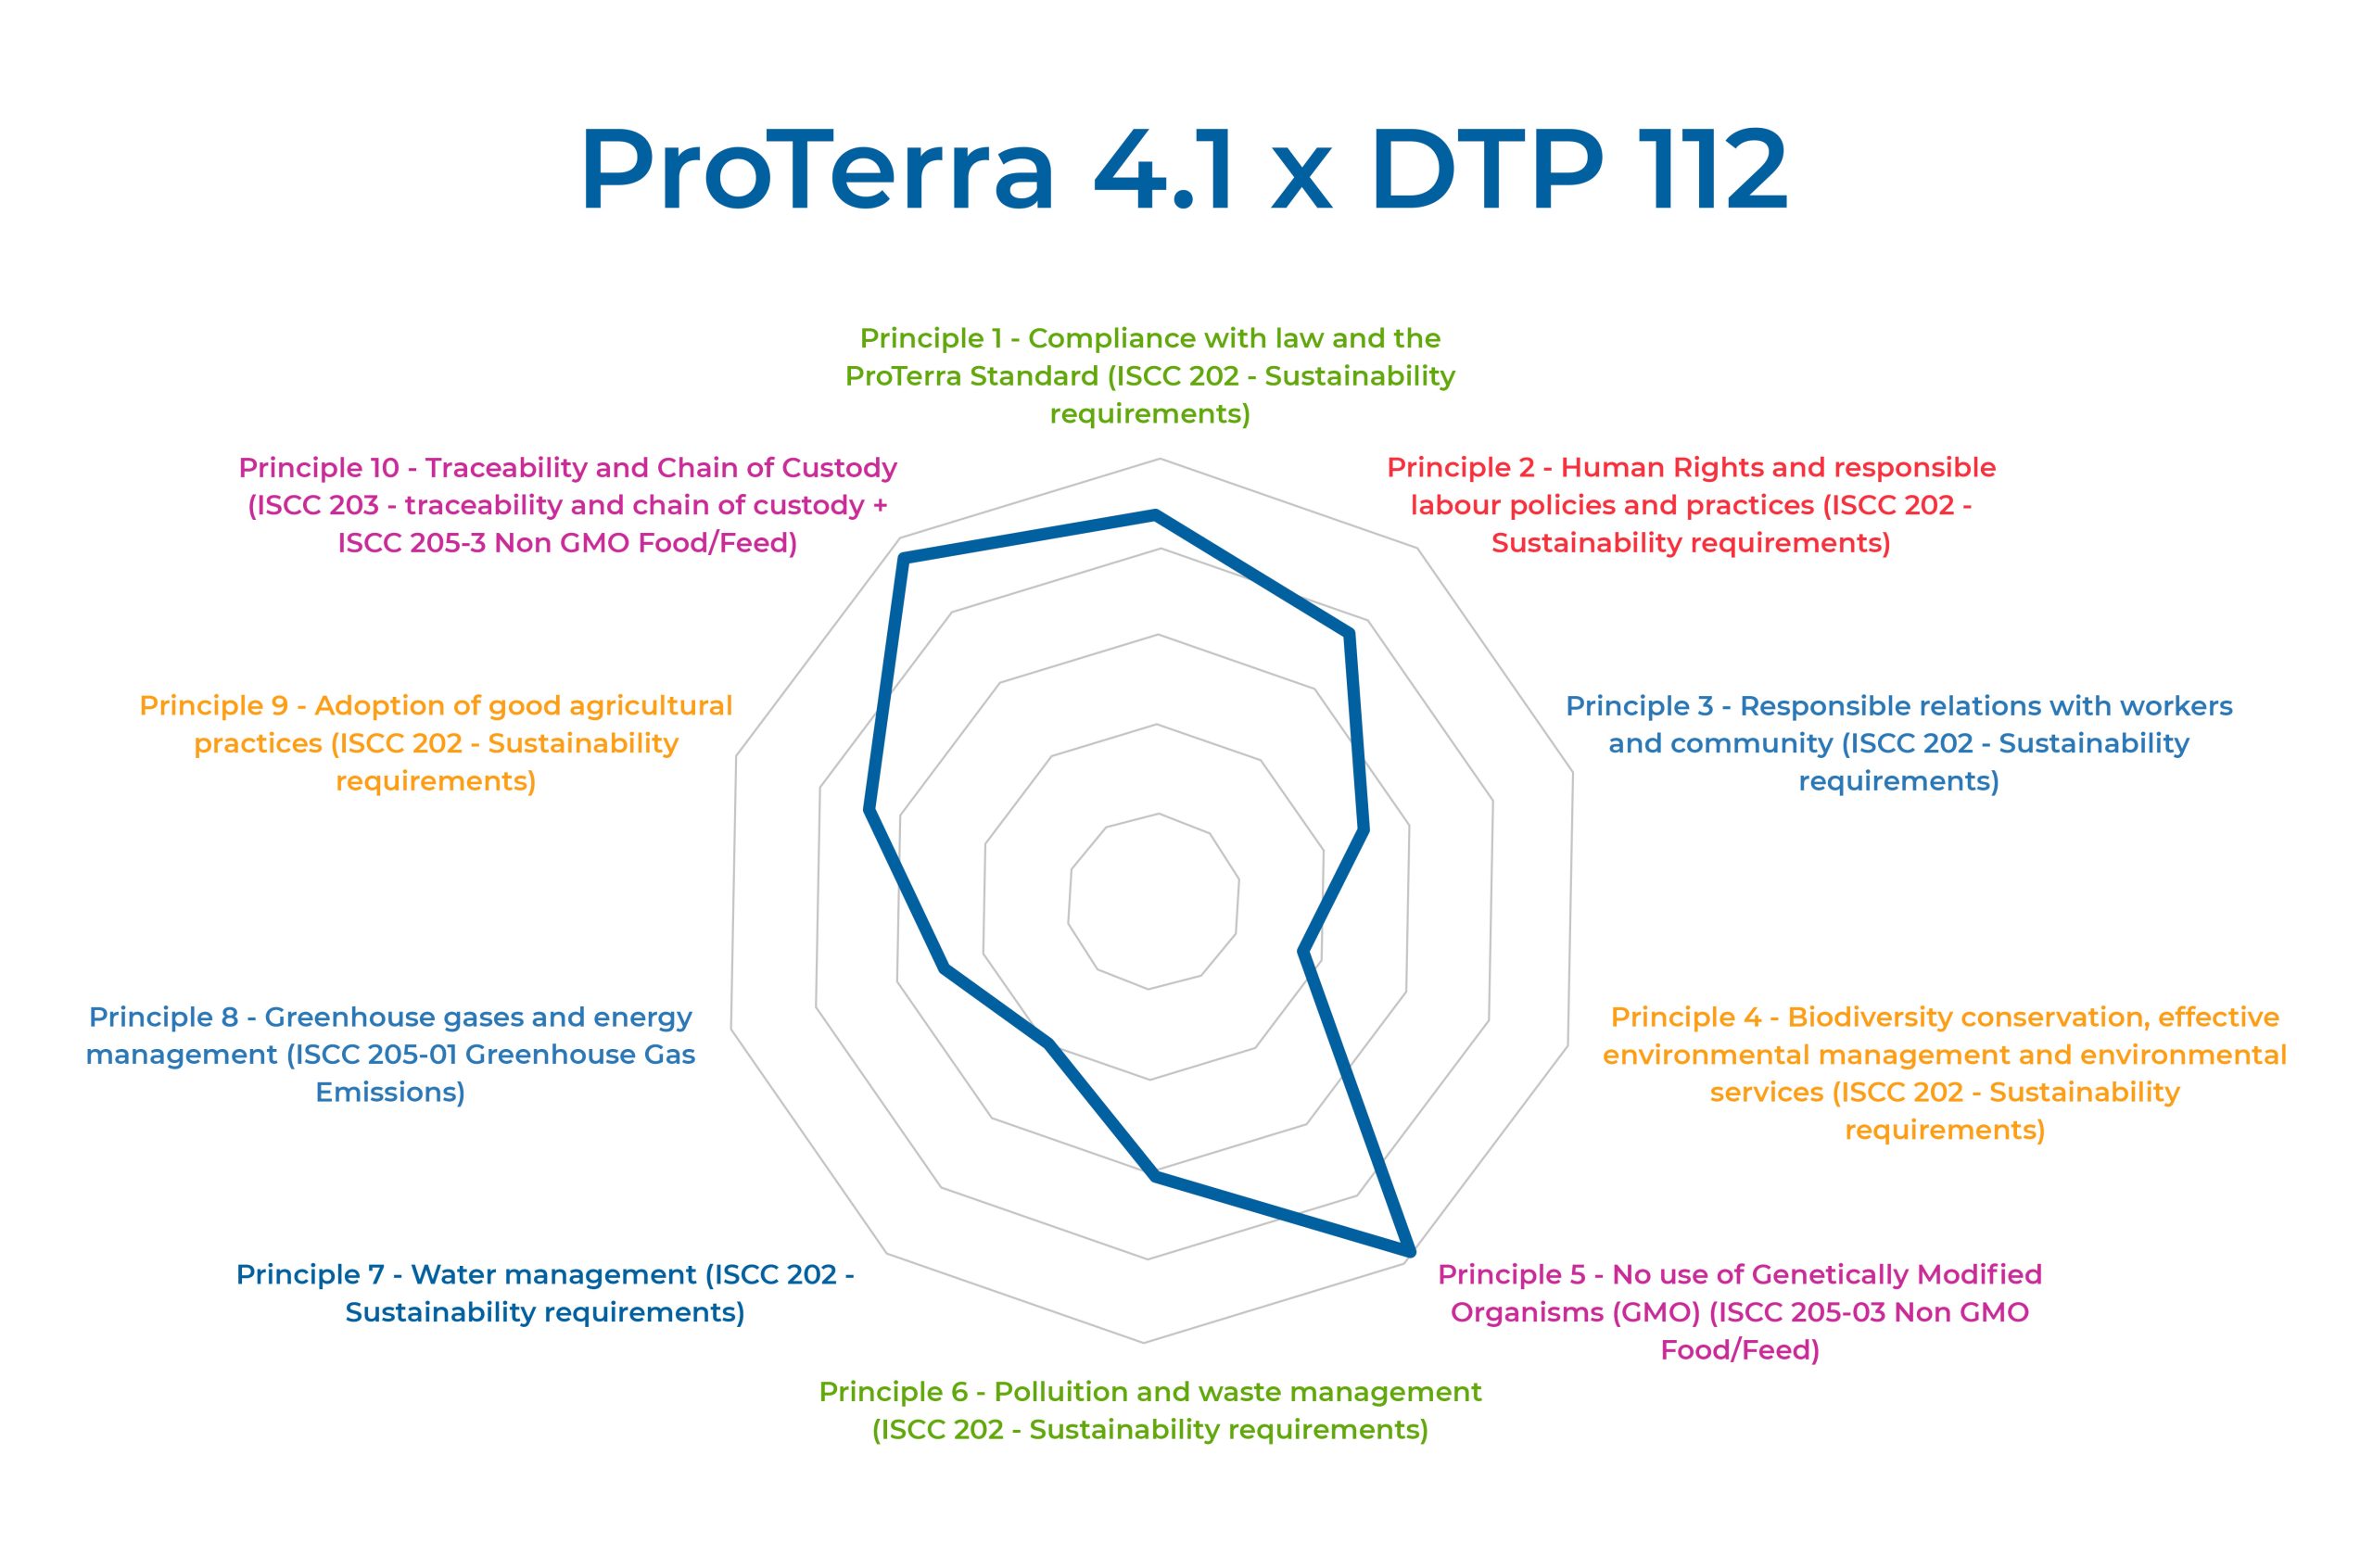 BENCHMARK SUSTAINABLE CEREAL AND OILSEED - DTP112 Ver 5 (09.01.2020) and ProTerra V4.1 + ProTerra Europa